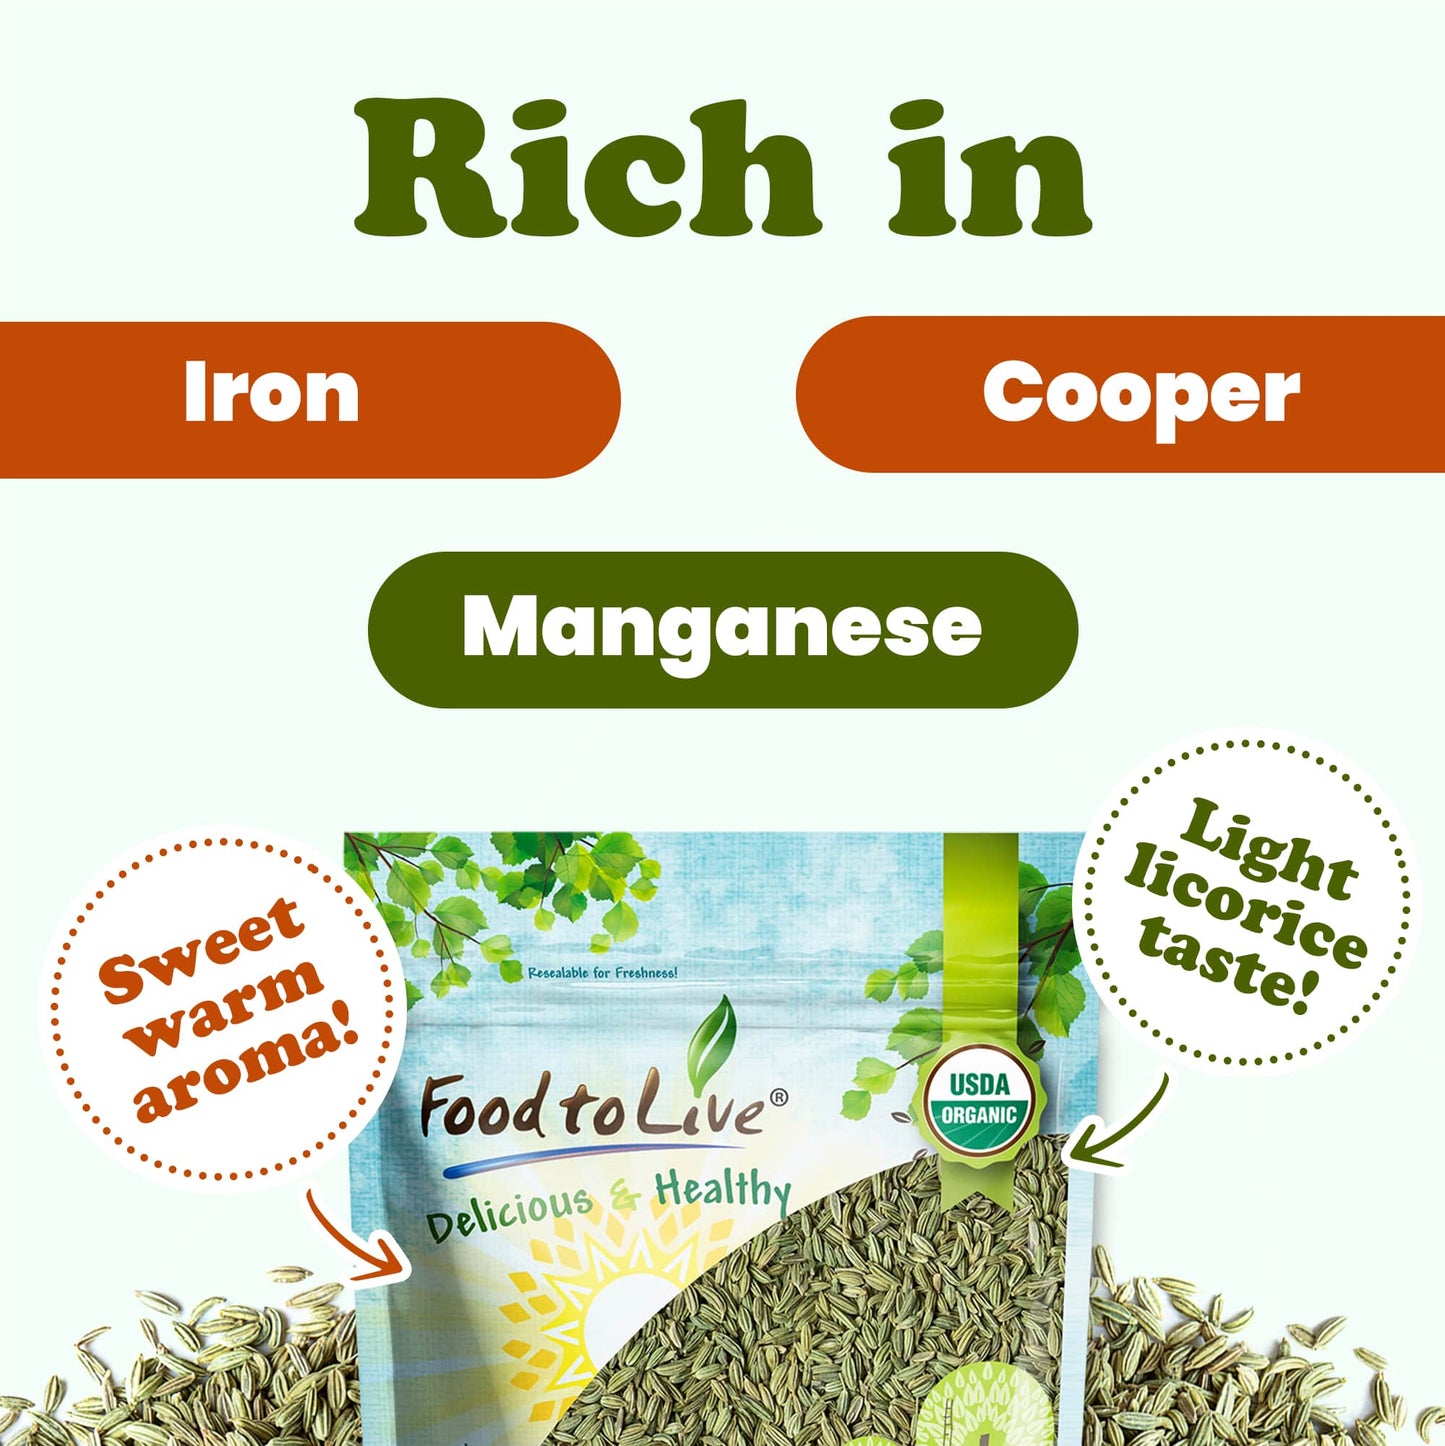 Organic Fennel Seeds - Whole, Non-GMO Spice, Non-Irradiated, Vegan, Dry, Bulk, High in Dietary Fiber - by Food to Live